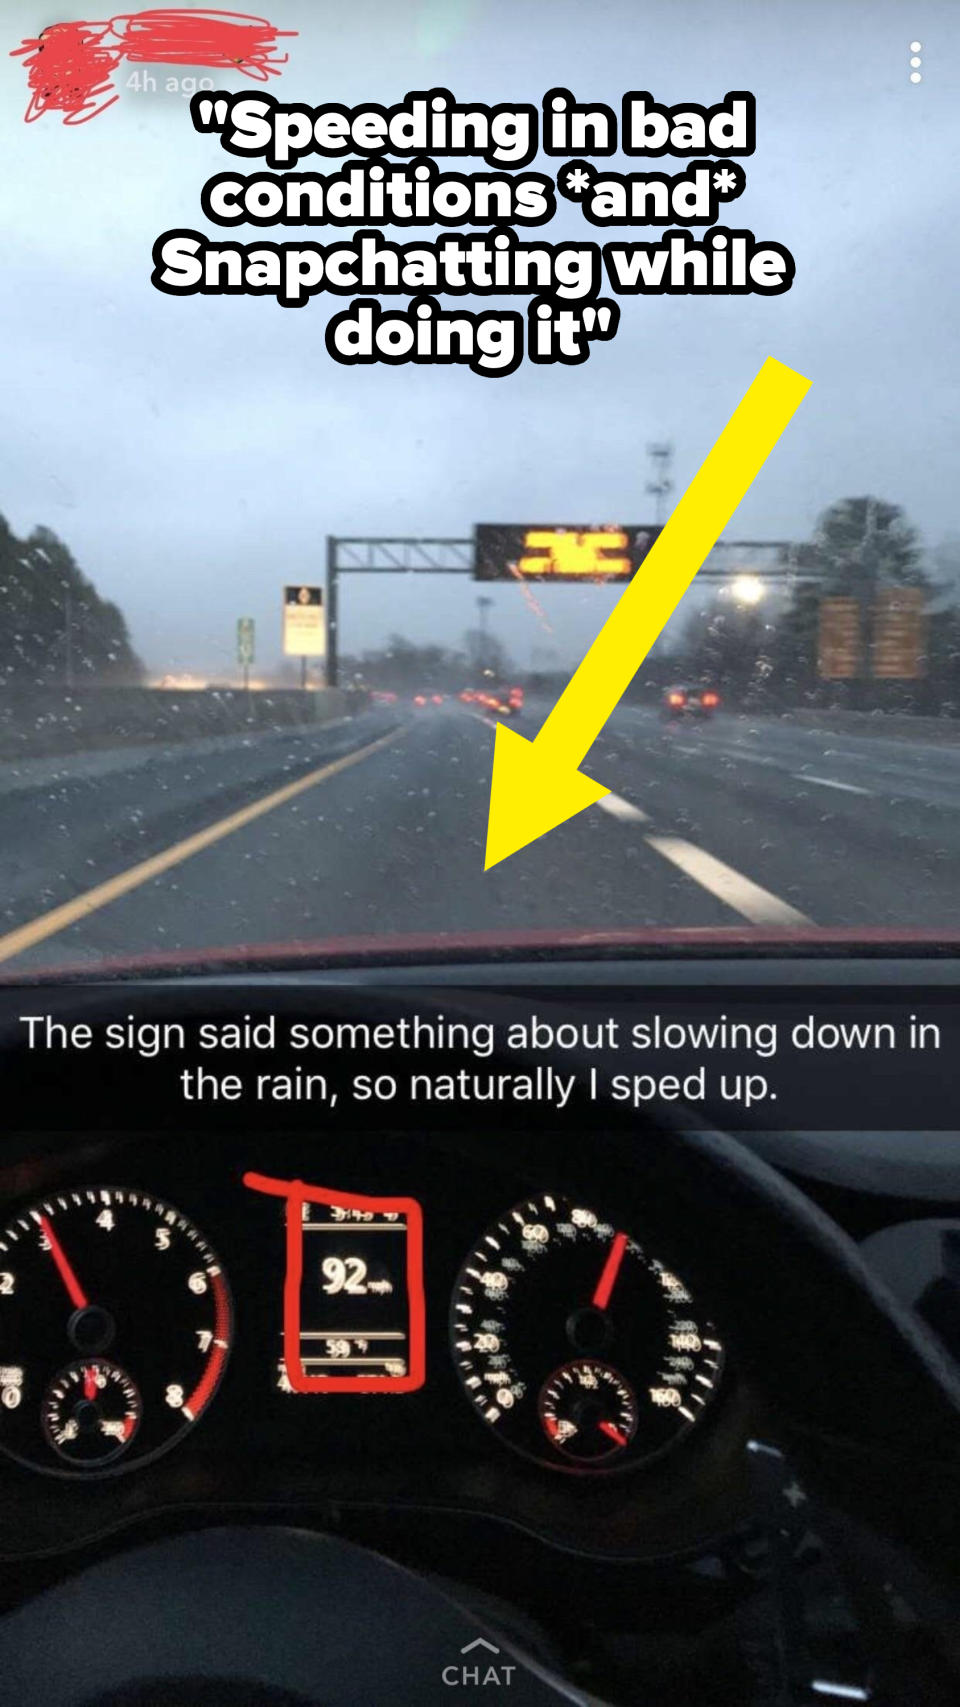 Dashboard showing speedometer at 92 mph, with a highway electronic sign in the rain ahead. Text references intentionally speeding up